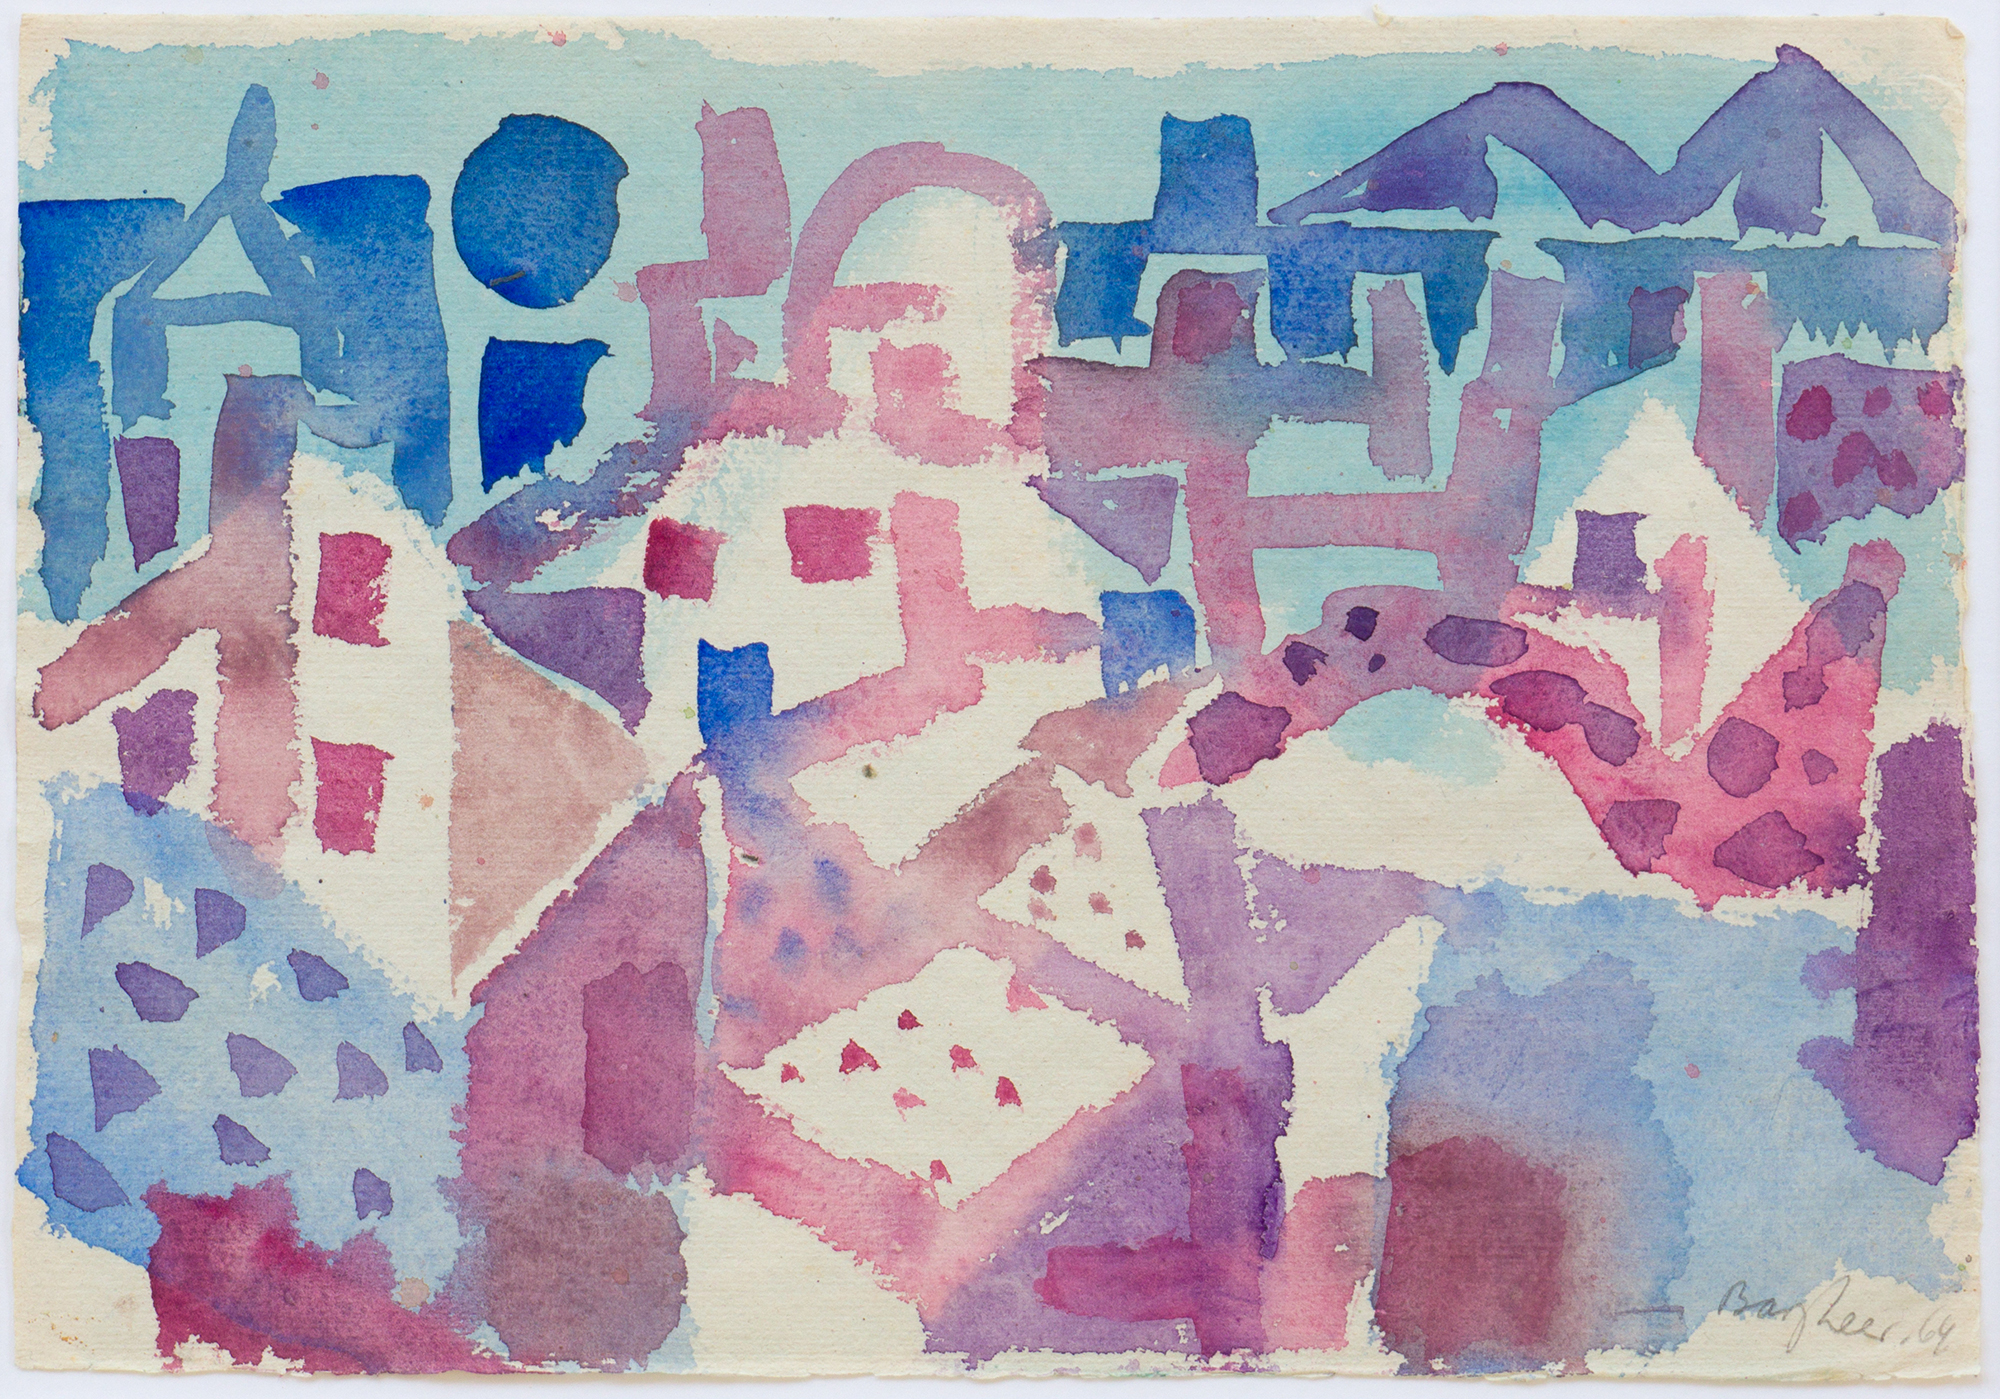 Buy the original watercolor "Blue city" by Eduard Bargheer (Painter, Expressionism) at our gallery.